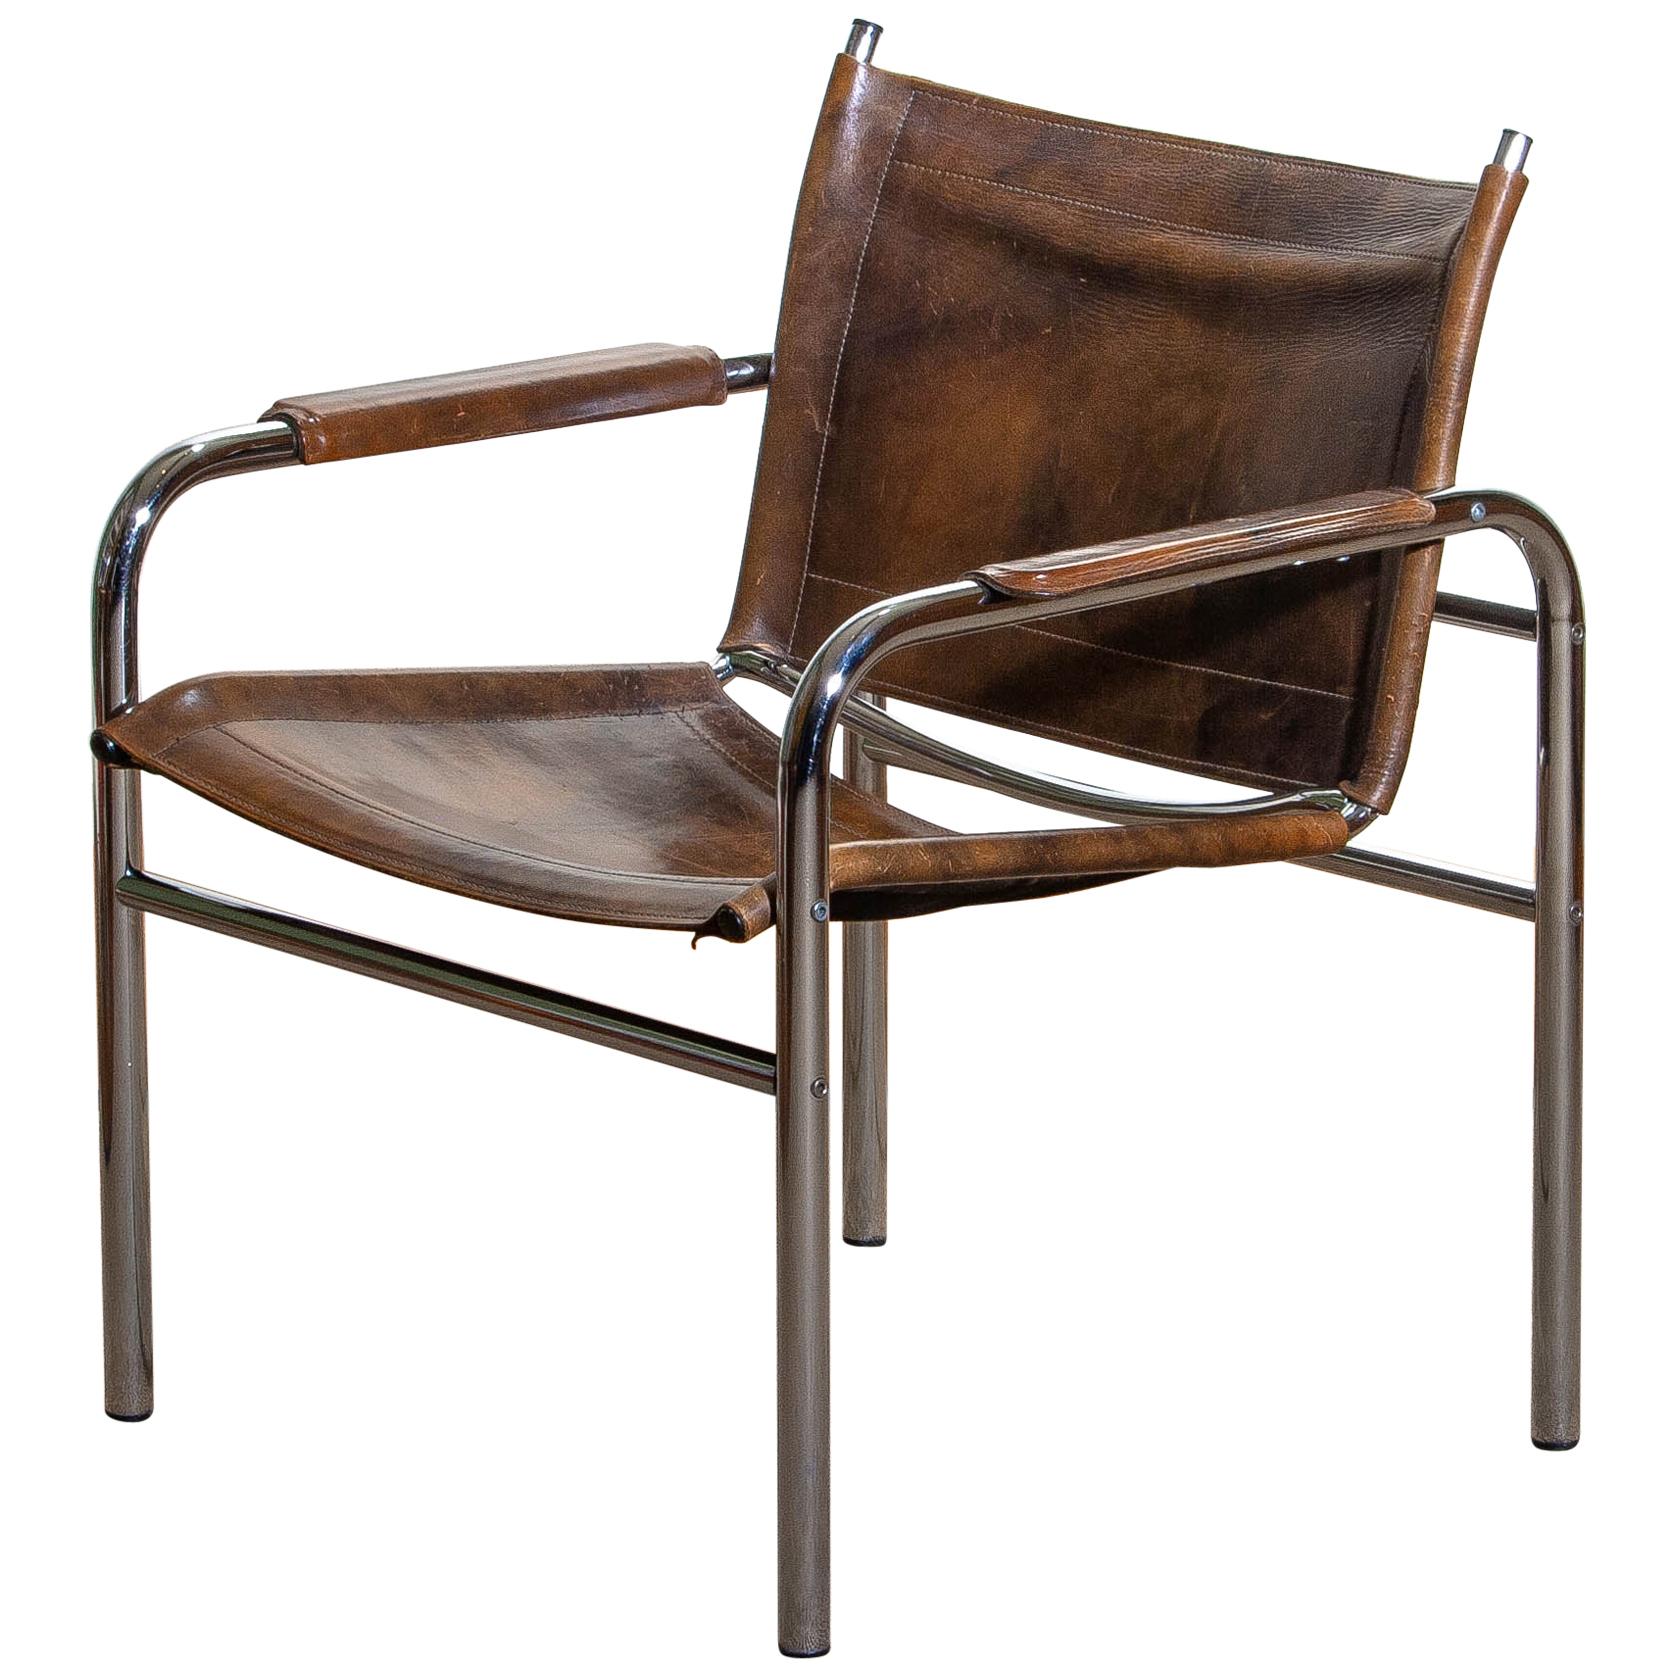 Beautiful armchair, model Klinte, designed by Tord Bjorklund, Sweden. The chair has a tubular chromed steel frame with brown-taupe leather back / seating and armrests with a beautiful patina.
Period 1980.

Note: We have two of these chairs in